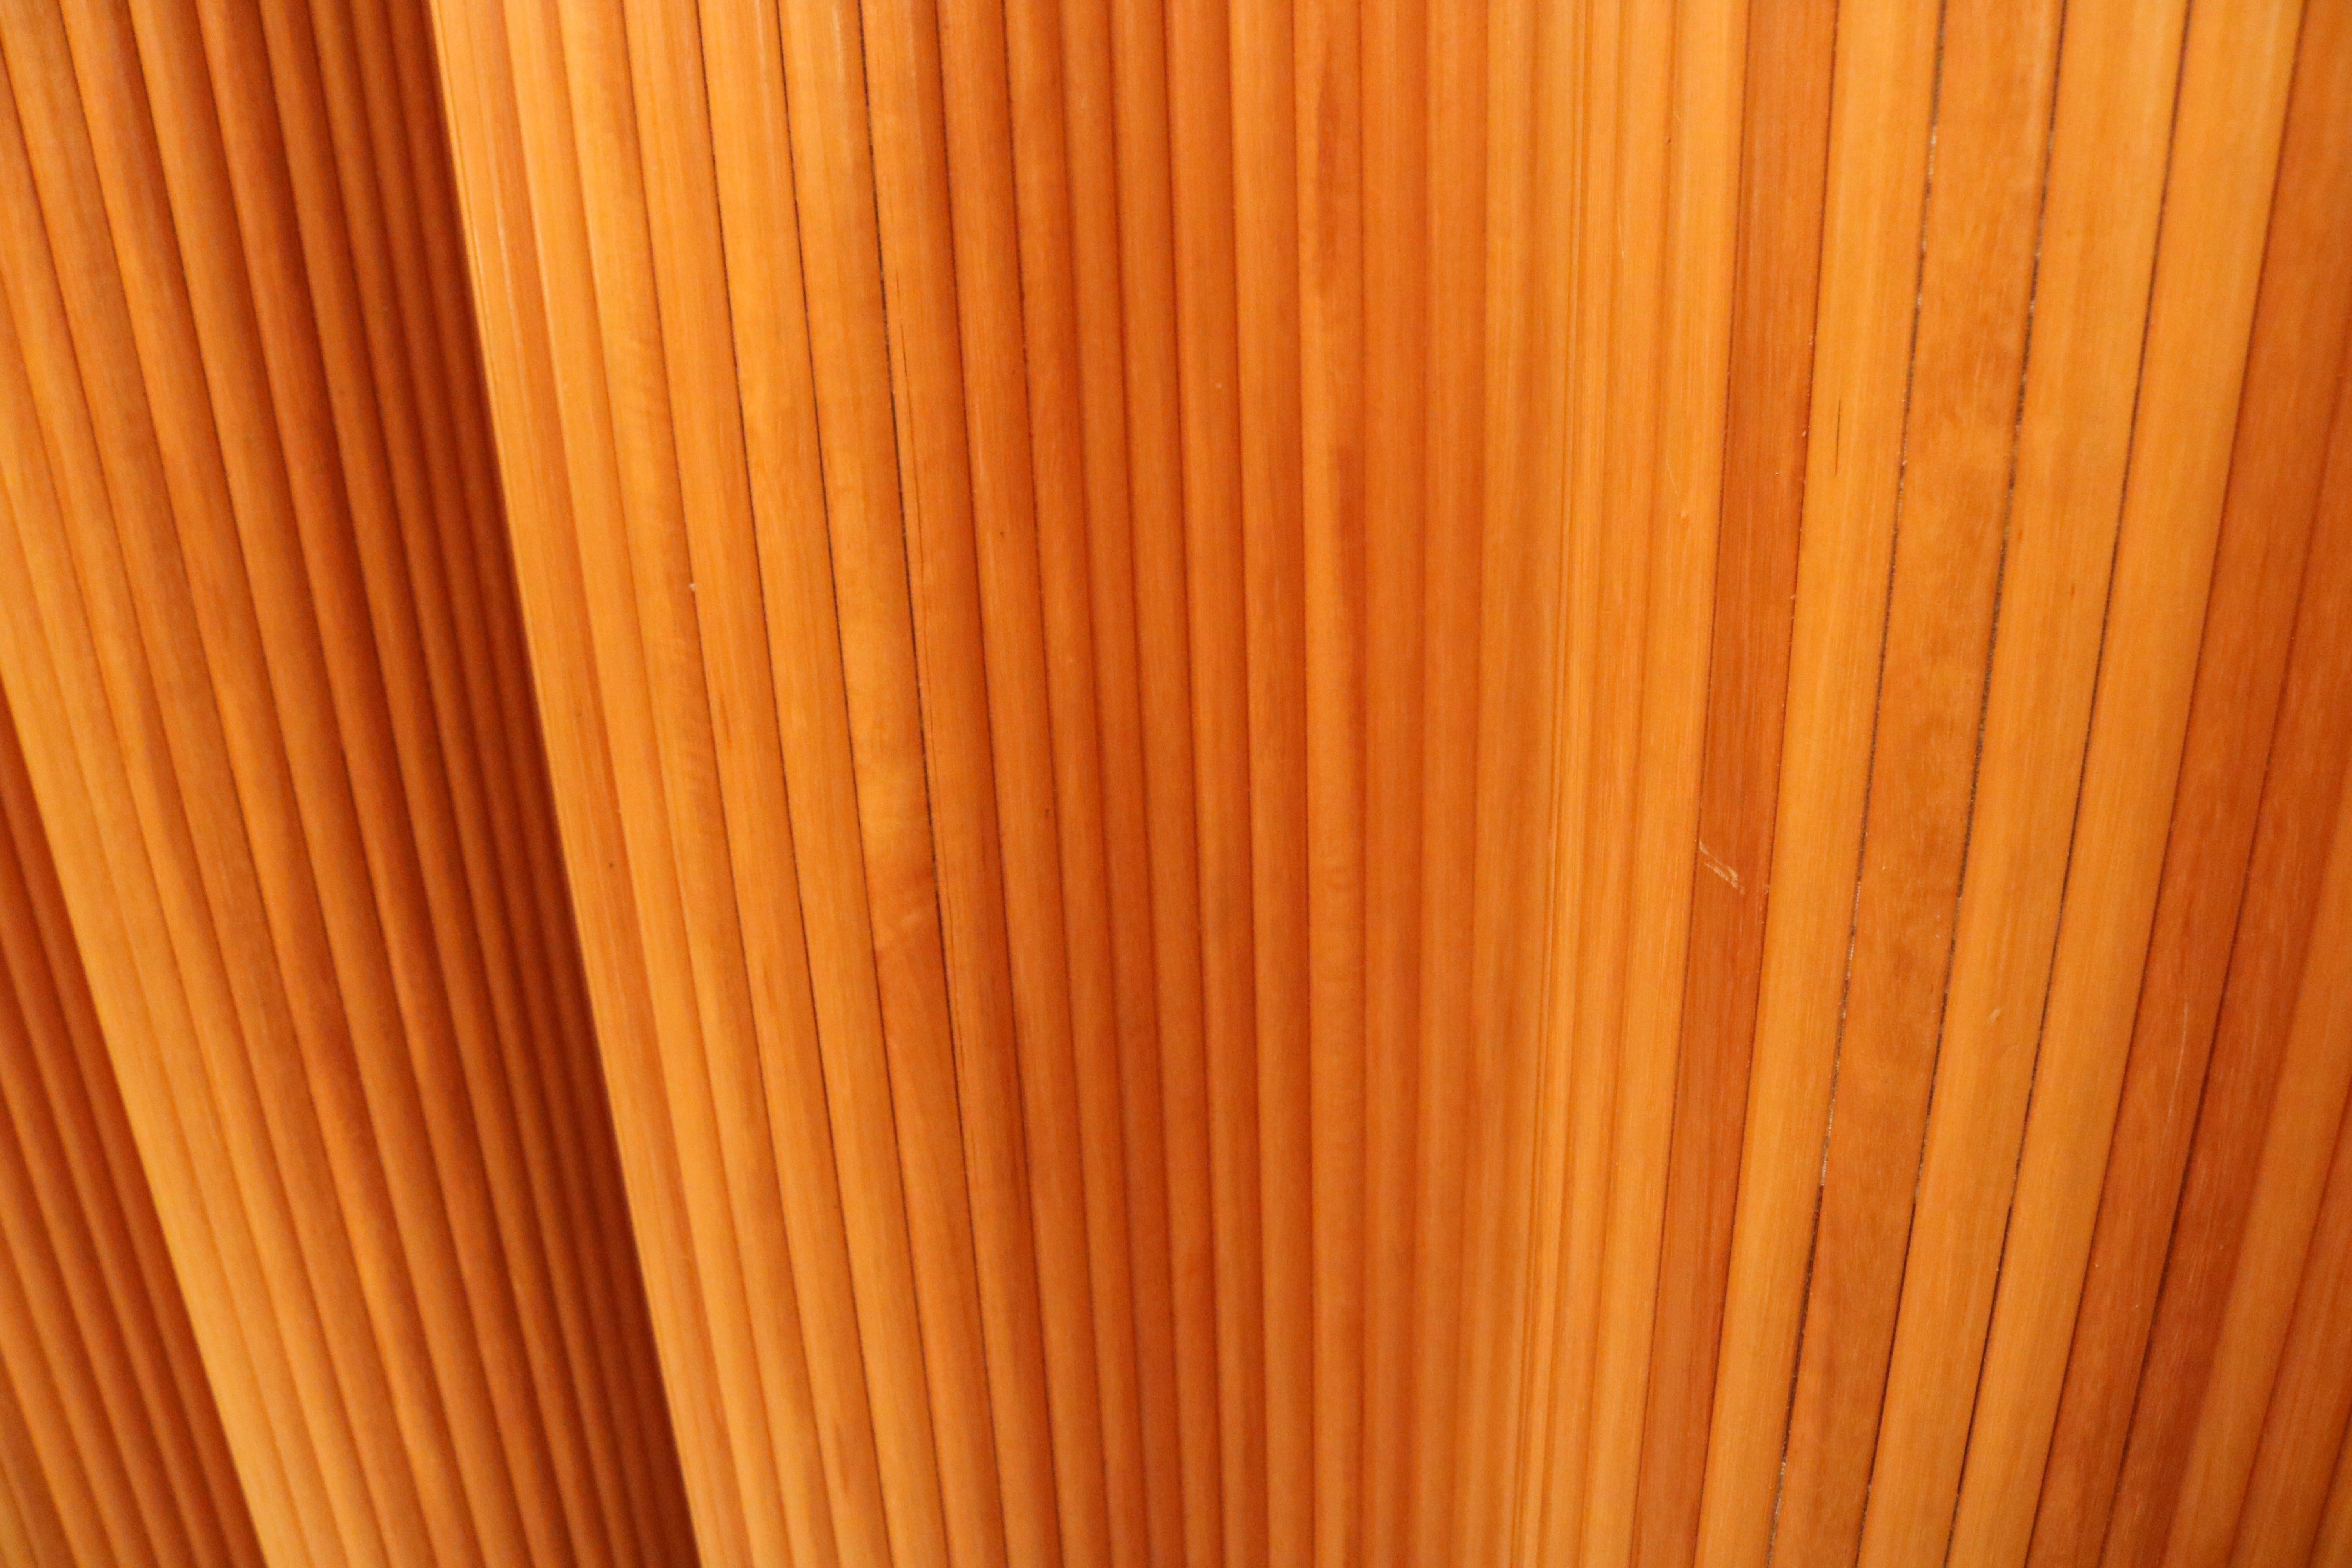 Cherrywood Italian Modernist Tambour Screen / Room Divider In Good Condition For Sale In New York, NY